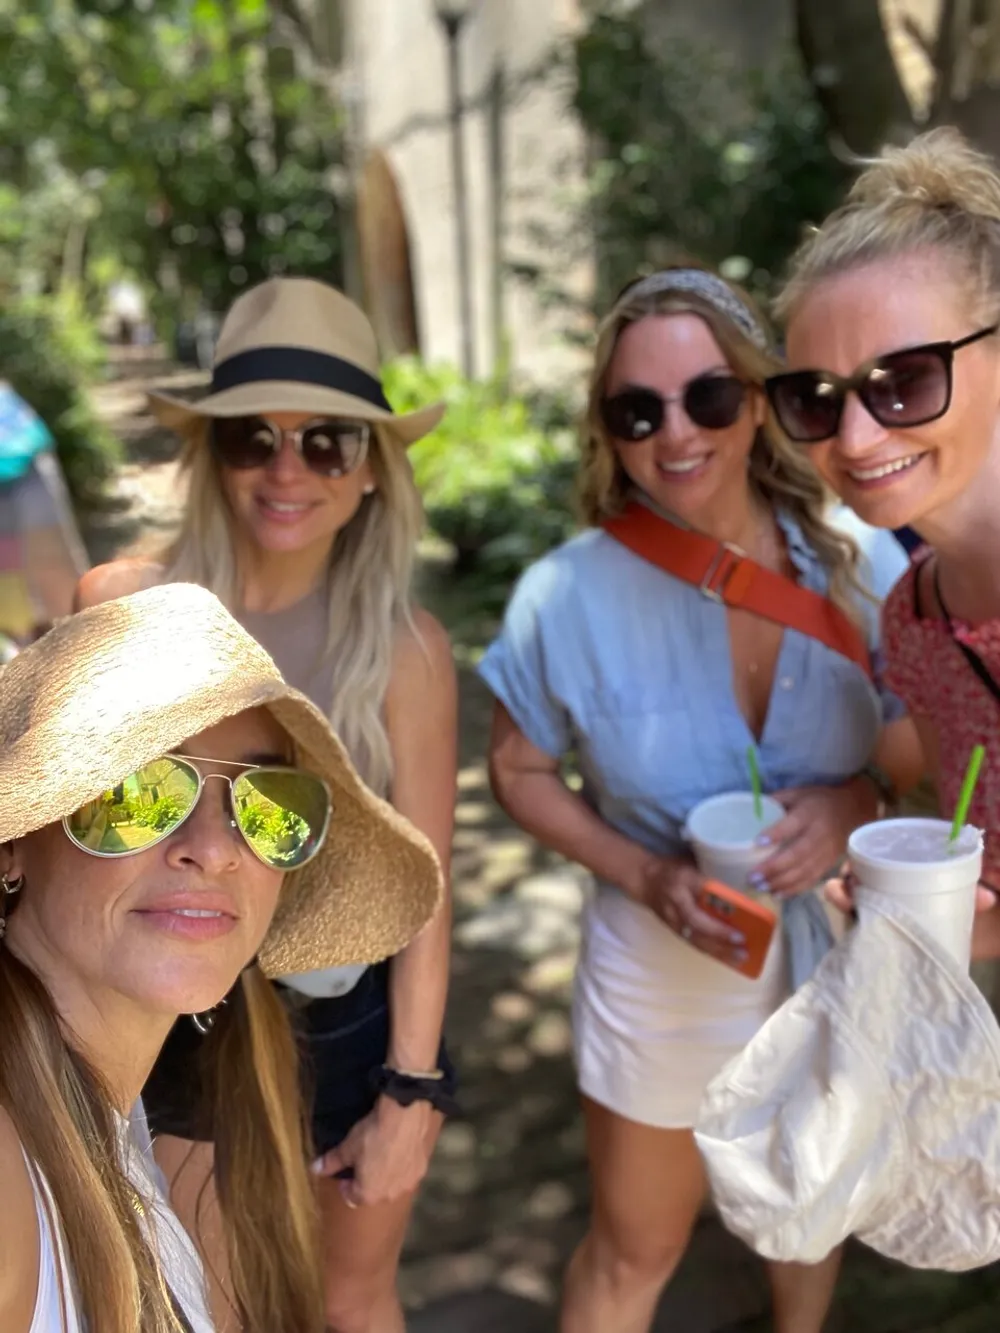 Four smiling women wearing summer attire and sunglasses are posing for a selfie in a sunny outdoor setting with green foliage in the background